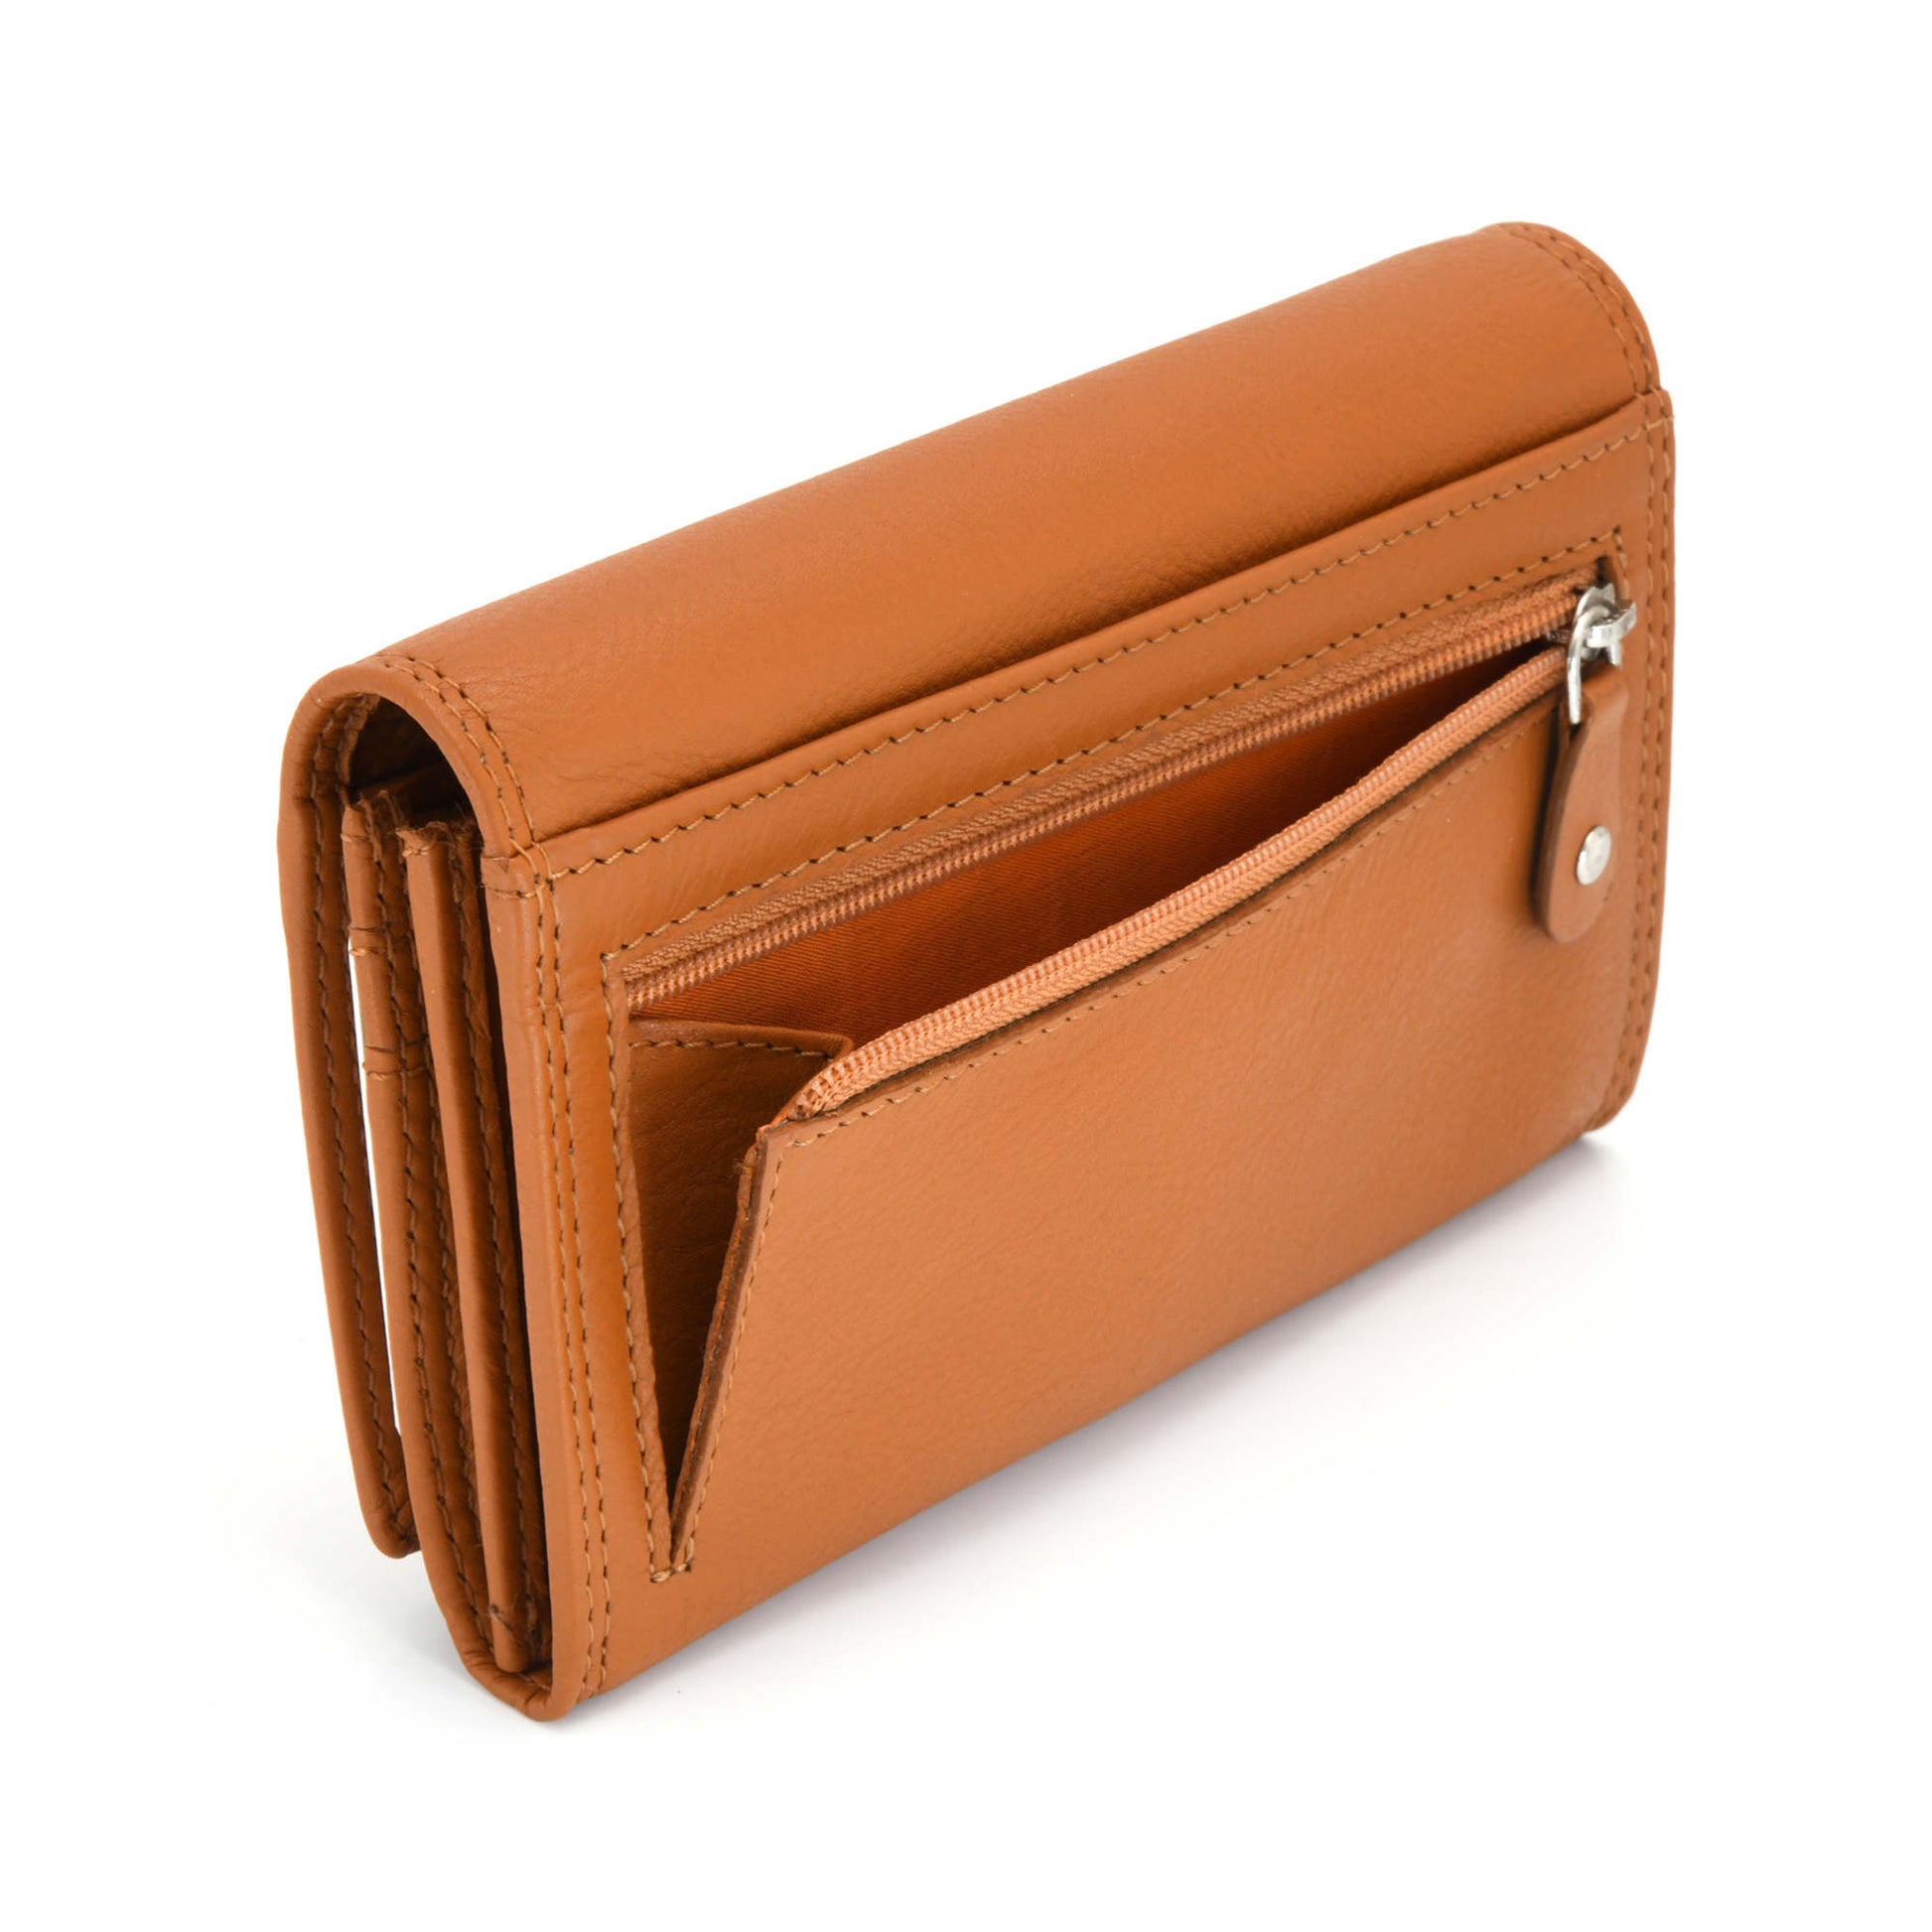 Style n Craft 300953-CG Ladies Clutch Wallet in Leather in Tan Color with RFID Protection - Back  View Showing Zipper Pocket